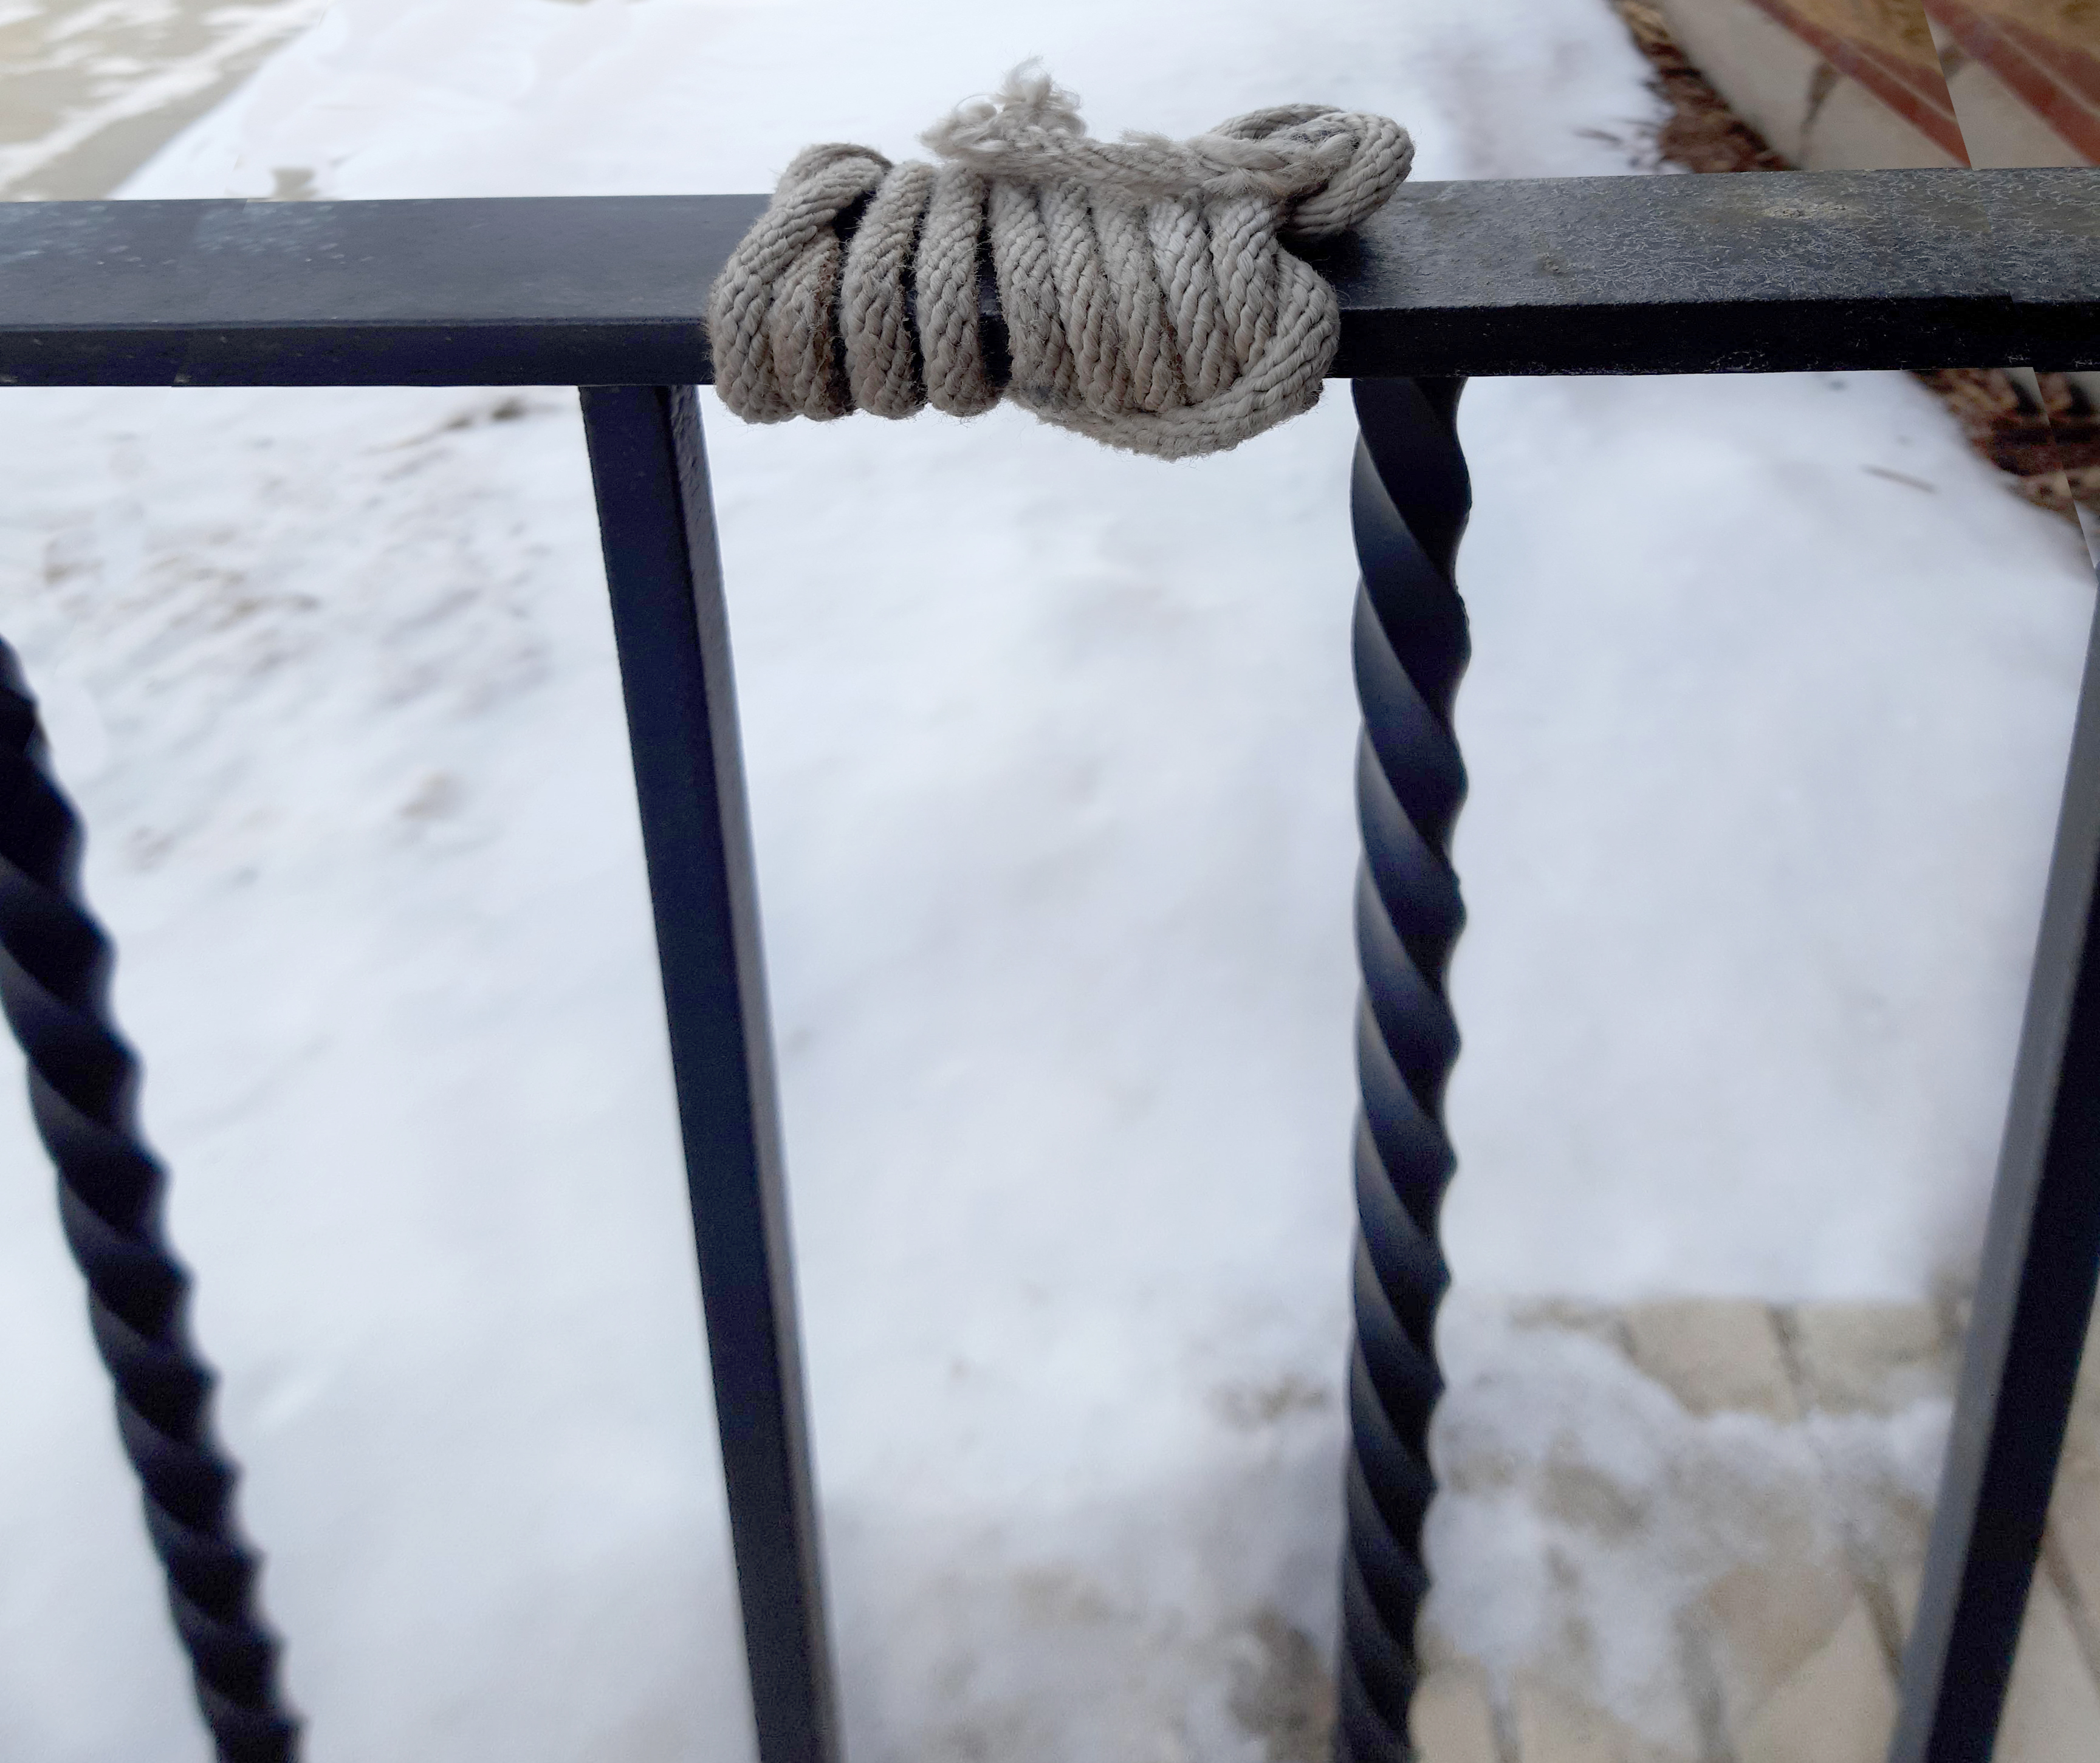 Rope on the railing